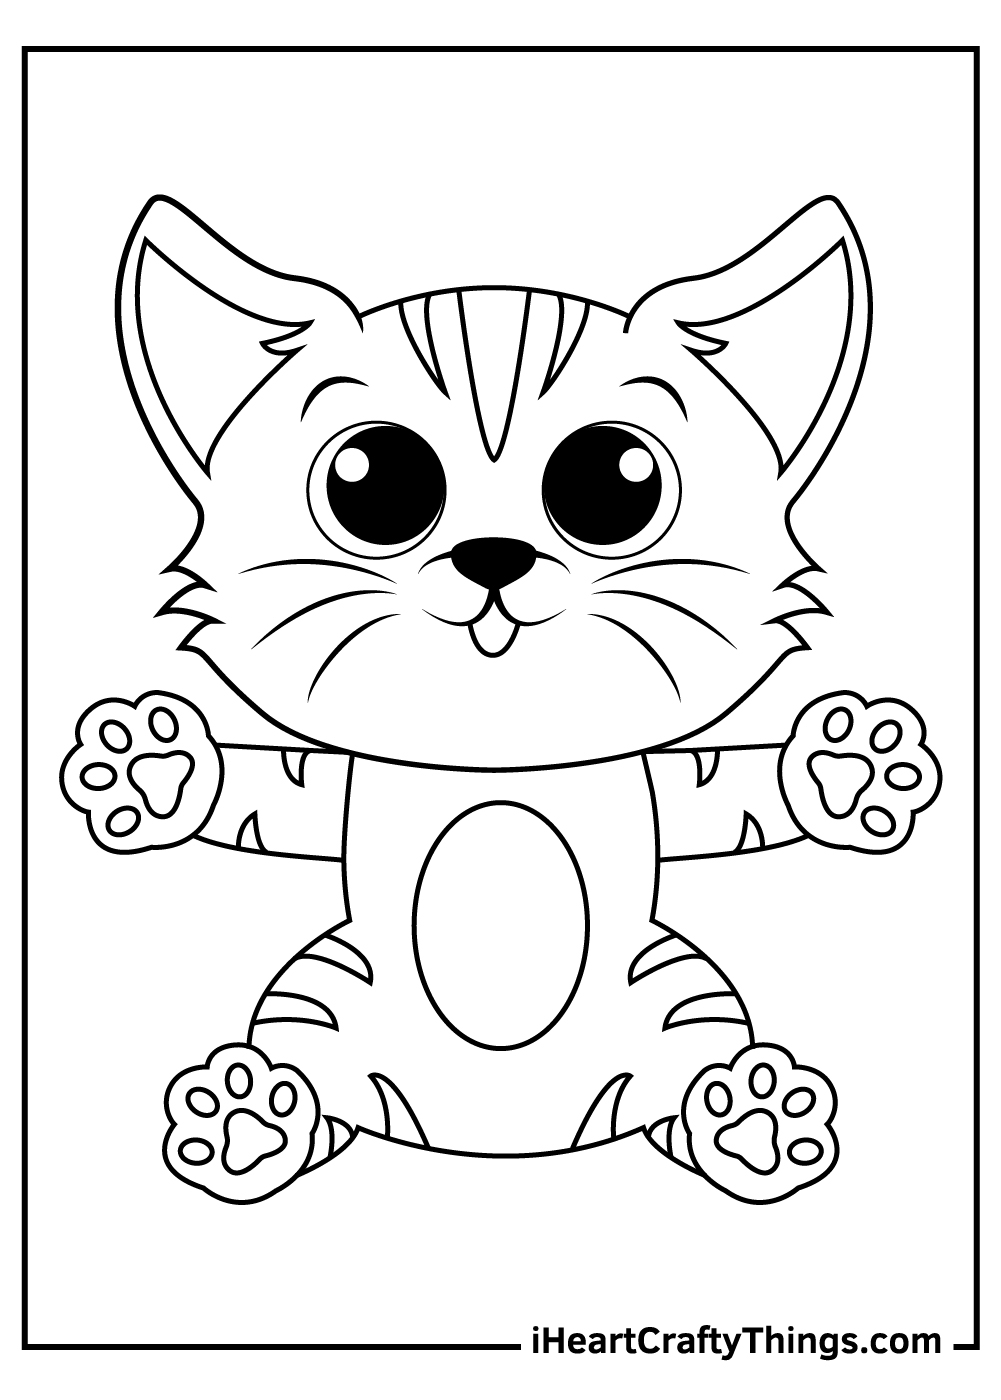 Coloring Pages For 20 To 20 Year Old Kids Download Them Or Print